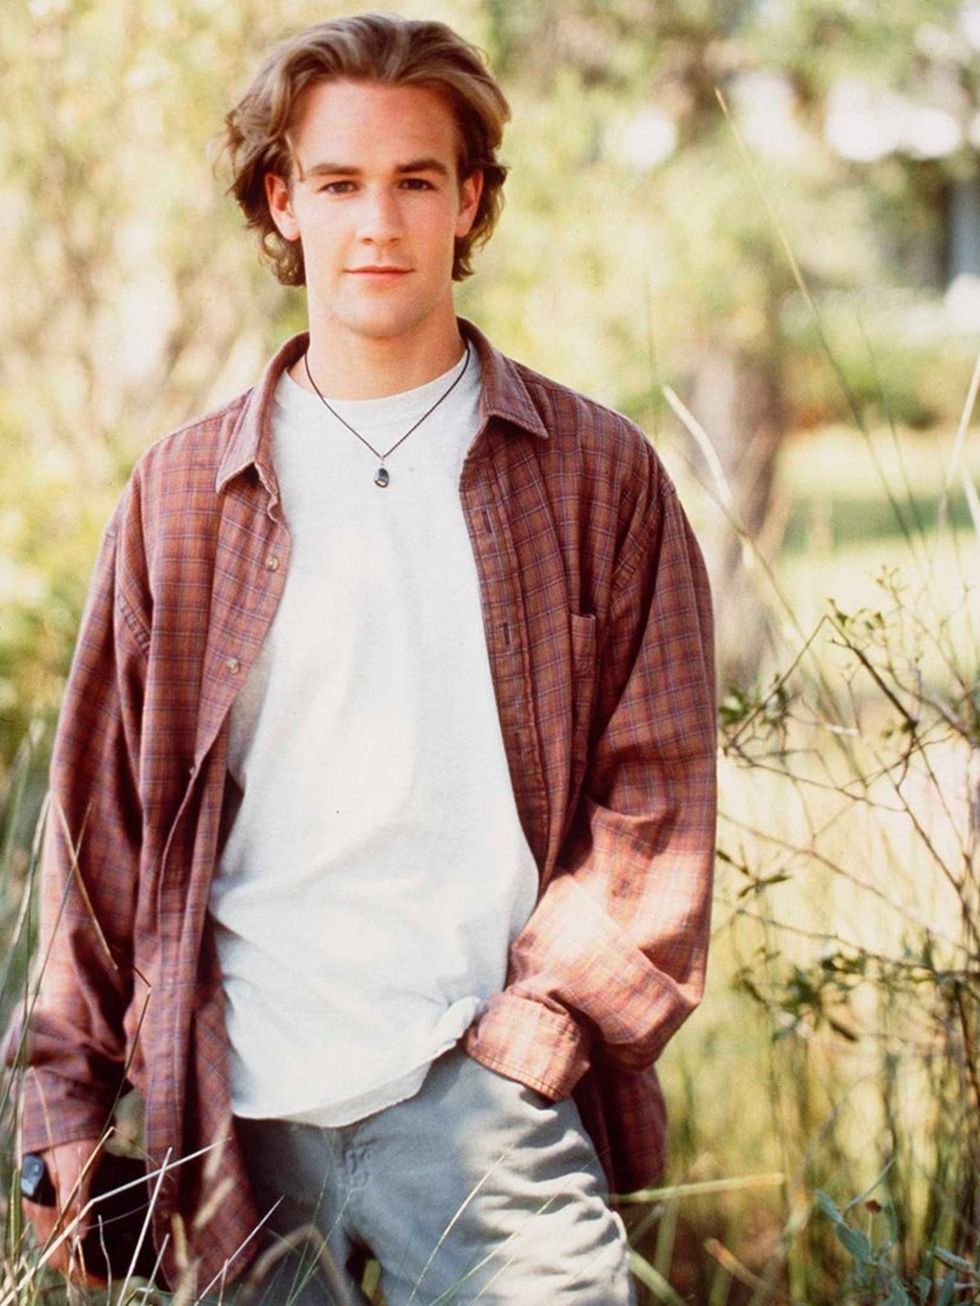 <p><strong>Dawson Leery</strong></p><p>From his eternally-debatable curtains to the slicked-back shaggy mane, our main man, Dawson Leery (played by James Van Der Beek), ushered us through adolescence by showcasing almost every unacceptable hairstyle of 